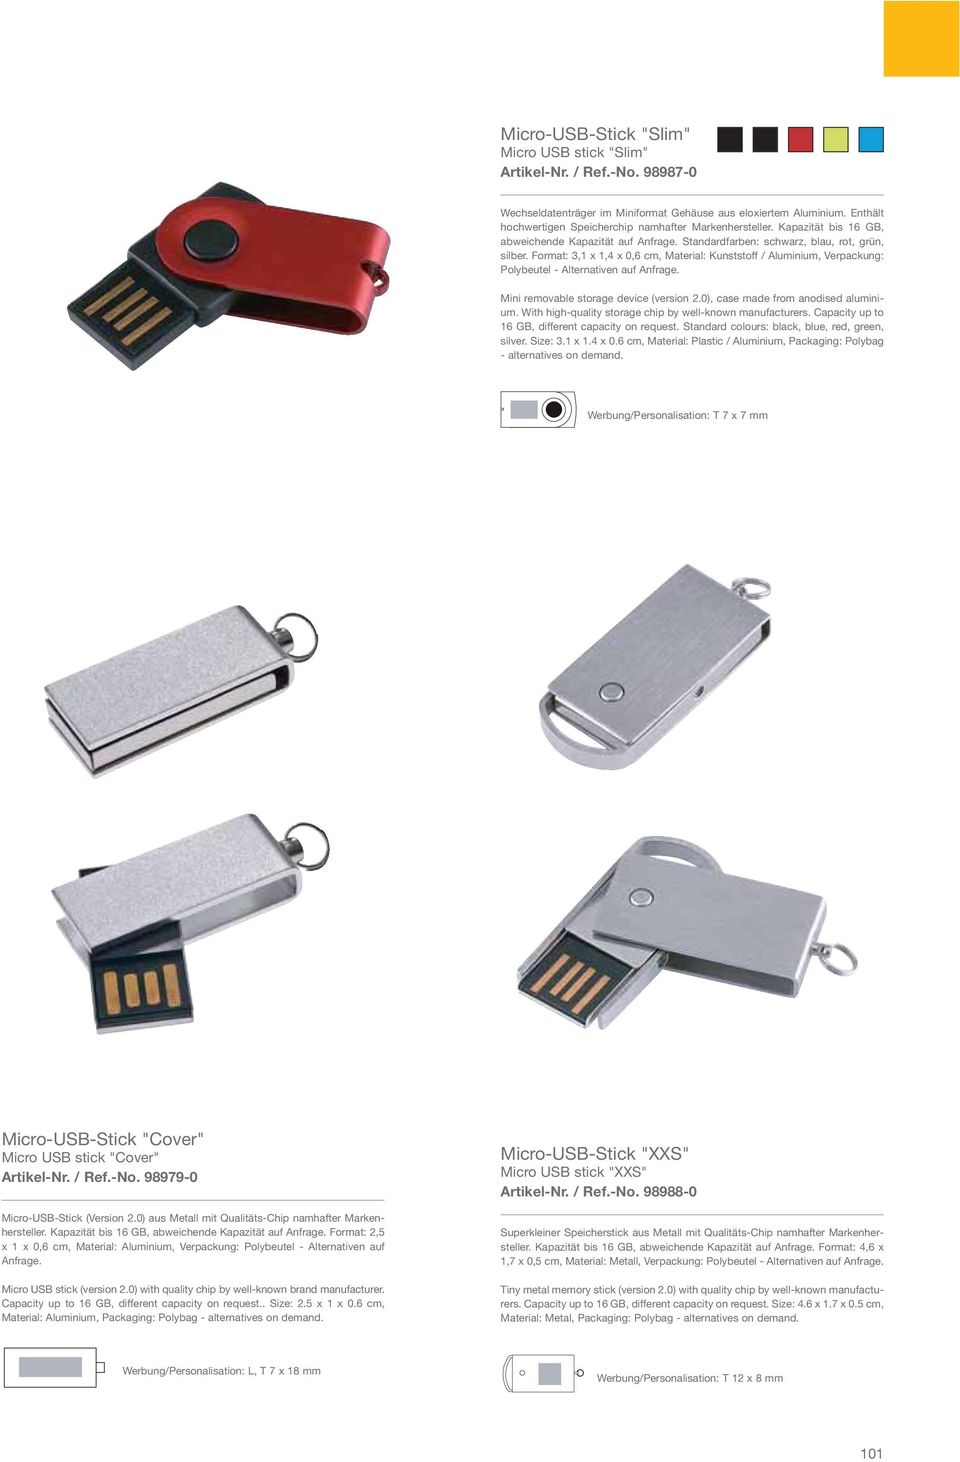 Format: 3,1 x 1,4 x 0,6 cm, Material: Kunststoff / Aluminium, Verpackung: Polybeutel - Alternativen auf Anfrage. Mini removable storage device (version 2.0), case made from anodised aluminium.